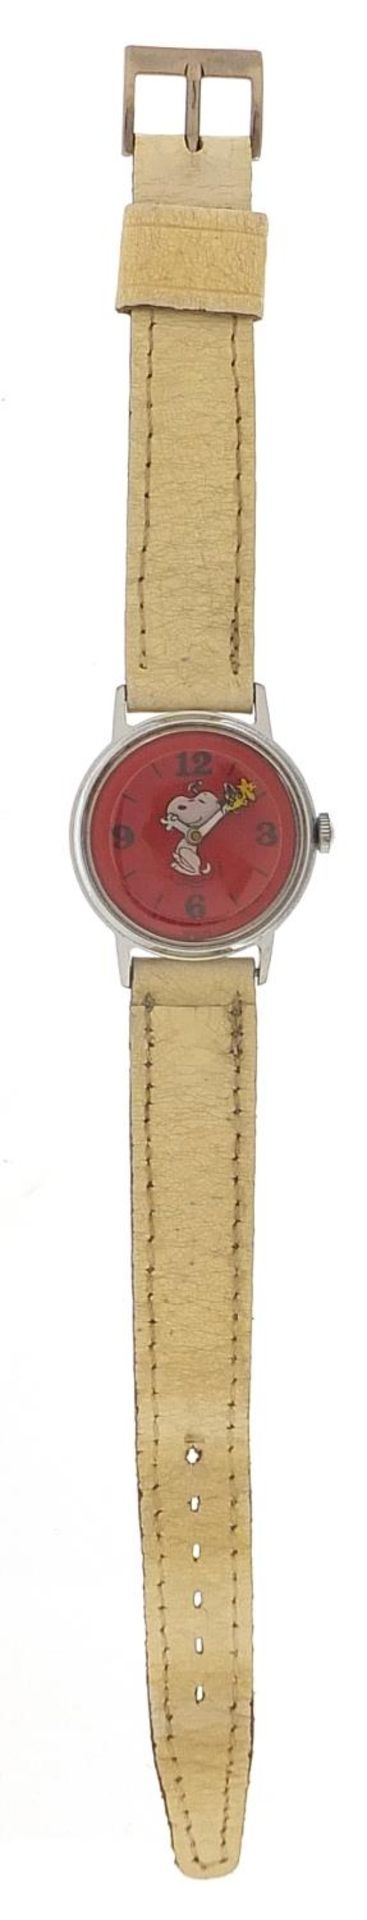 Vintage Snoopy wristwatch with moving arms, 31mm in diameter - Image 2 of 5